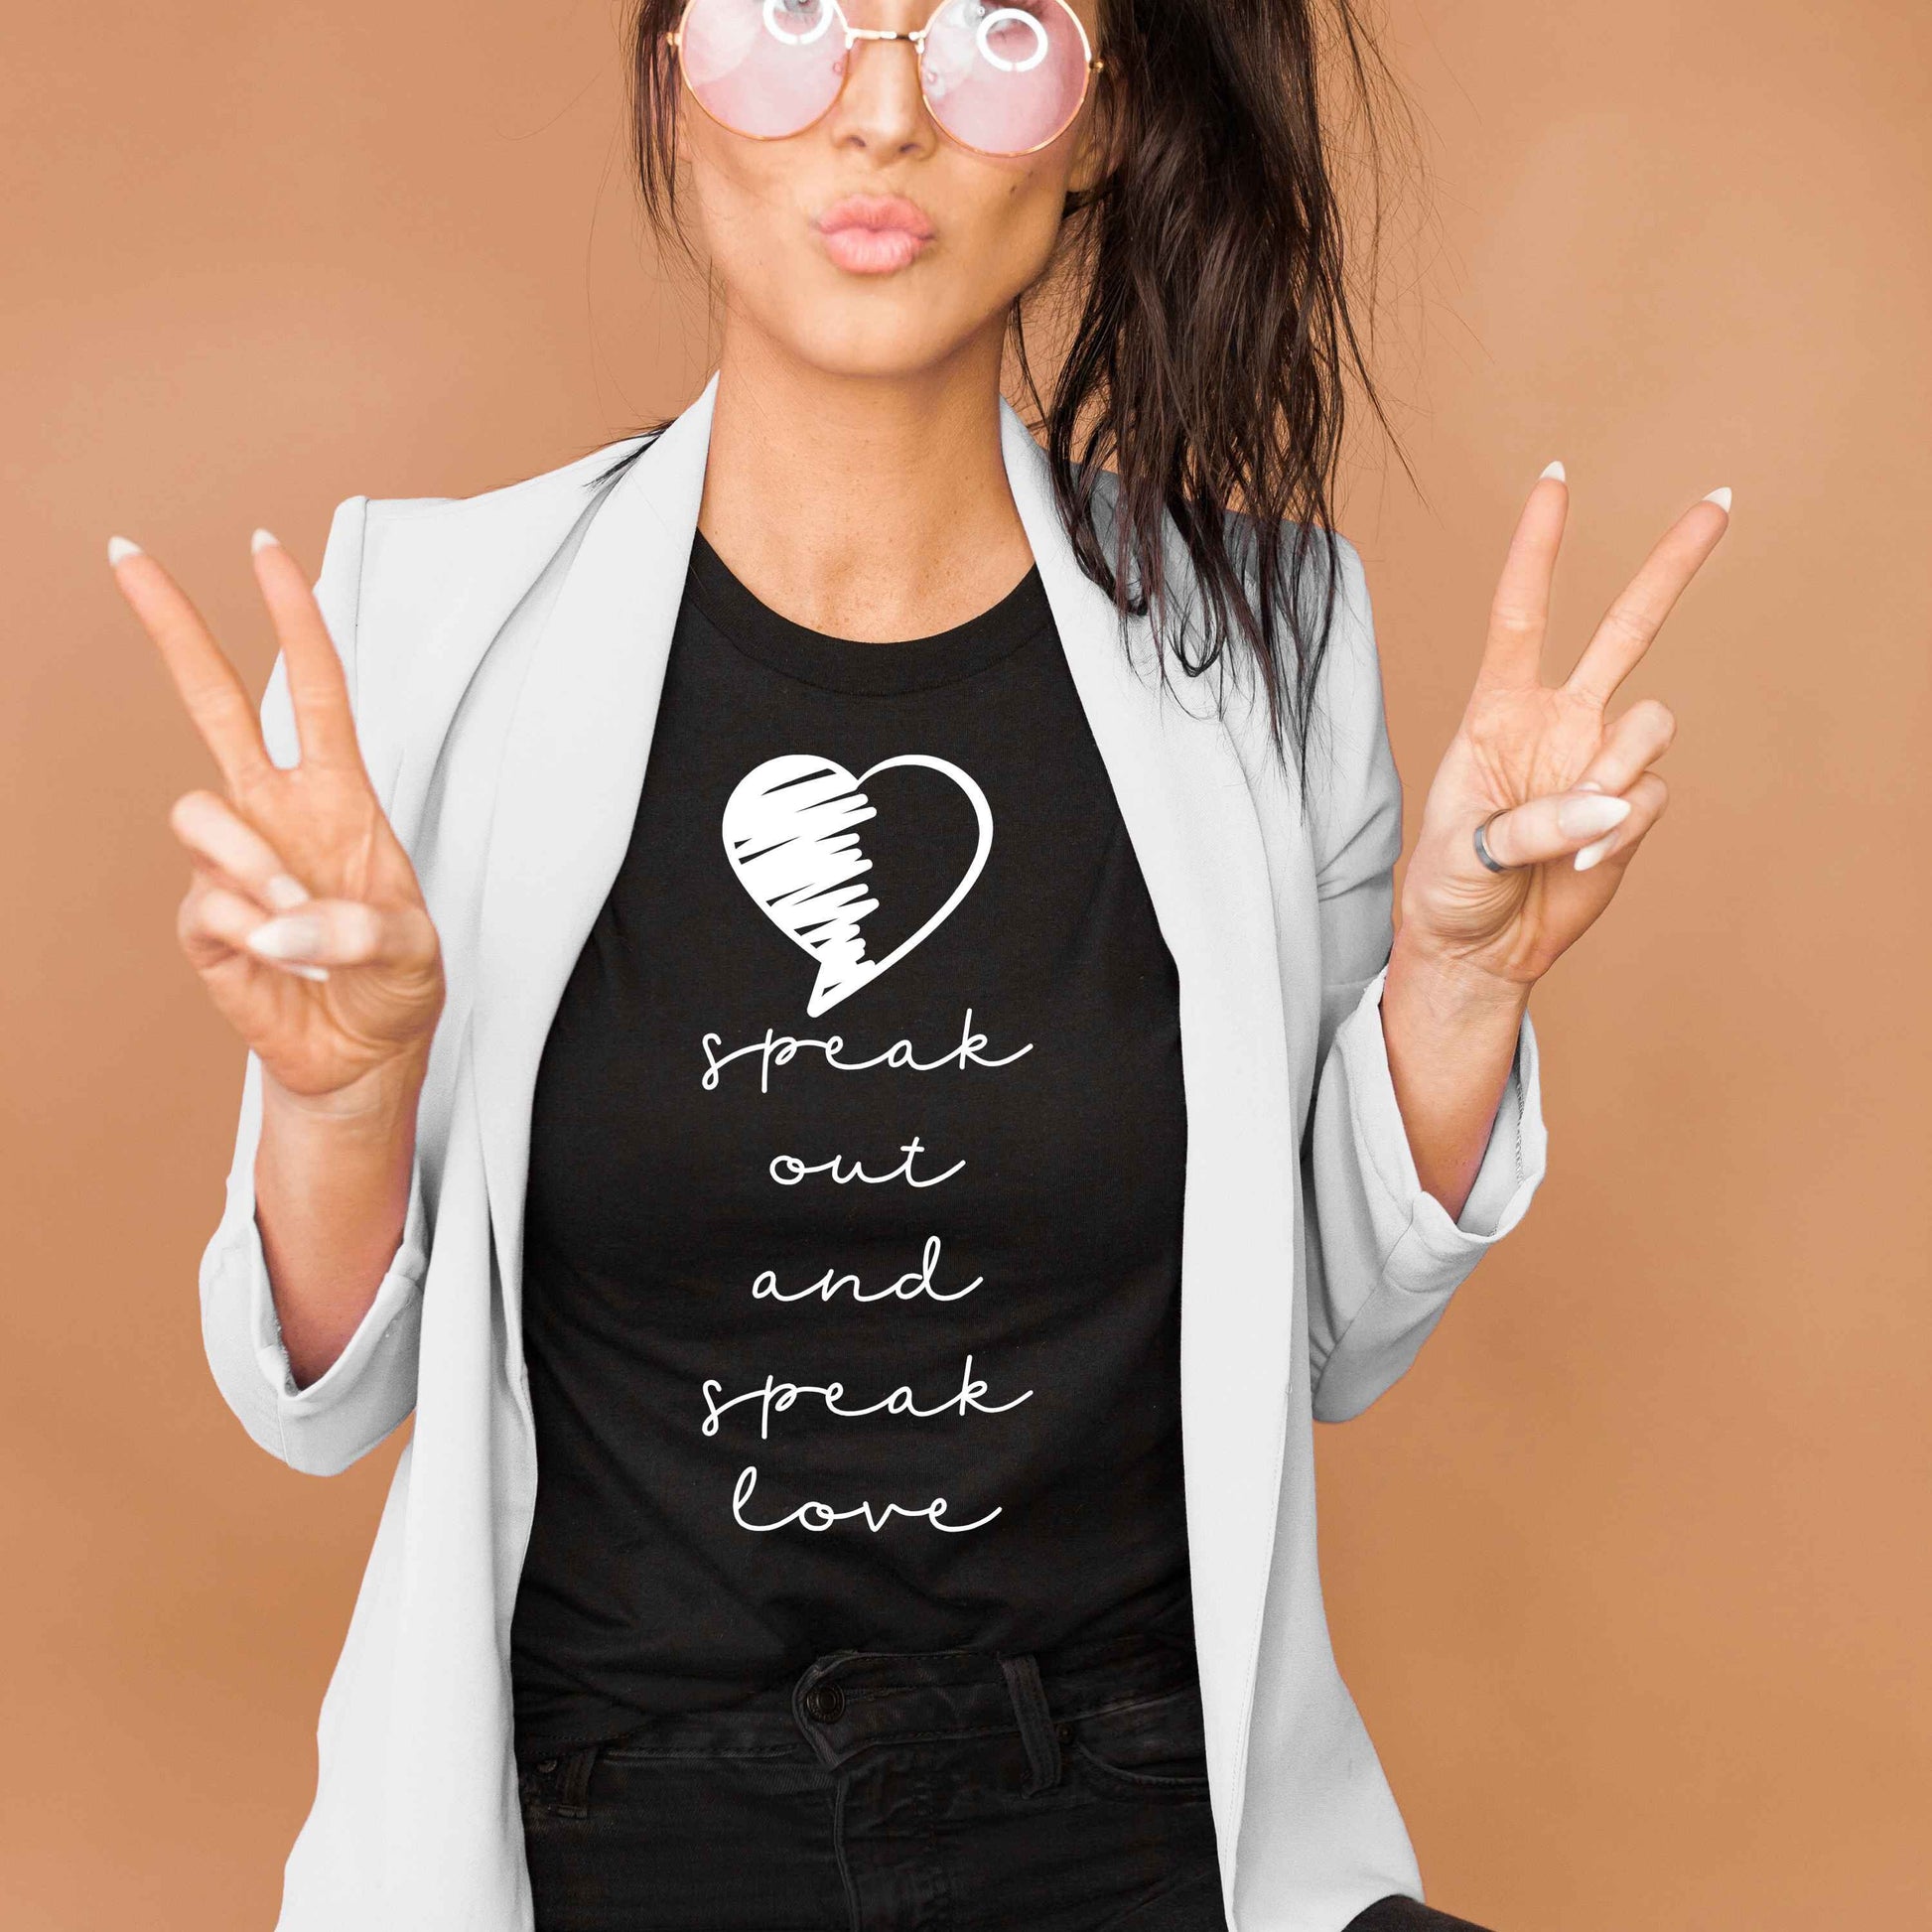 Speak Out and Speak Love unisex t-shirt • super soft tees for women • social justice shirt